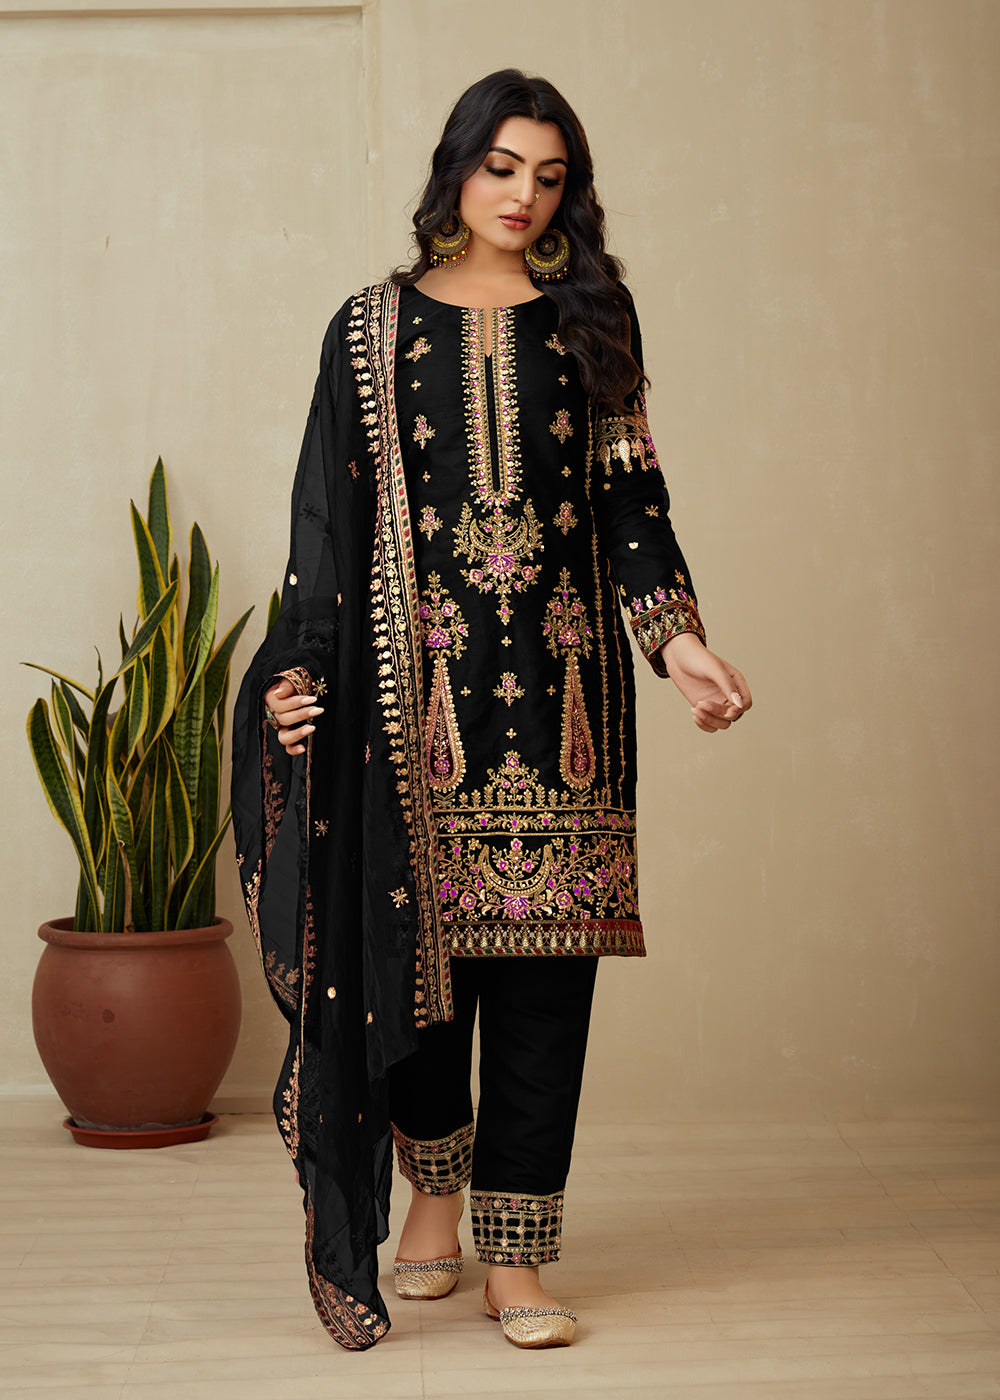 Buy Now Pure Black Organza Embroidered Traditional Salwar Kameez Online in USA, UK, Canada, Germany, Australia & Worldwide at Empress Clothing. 